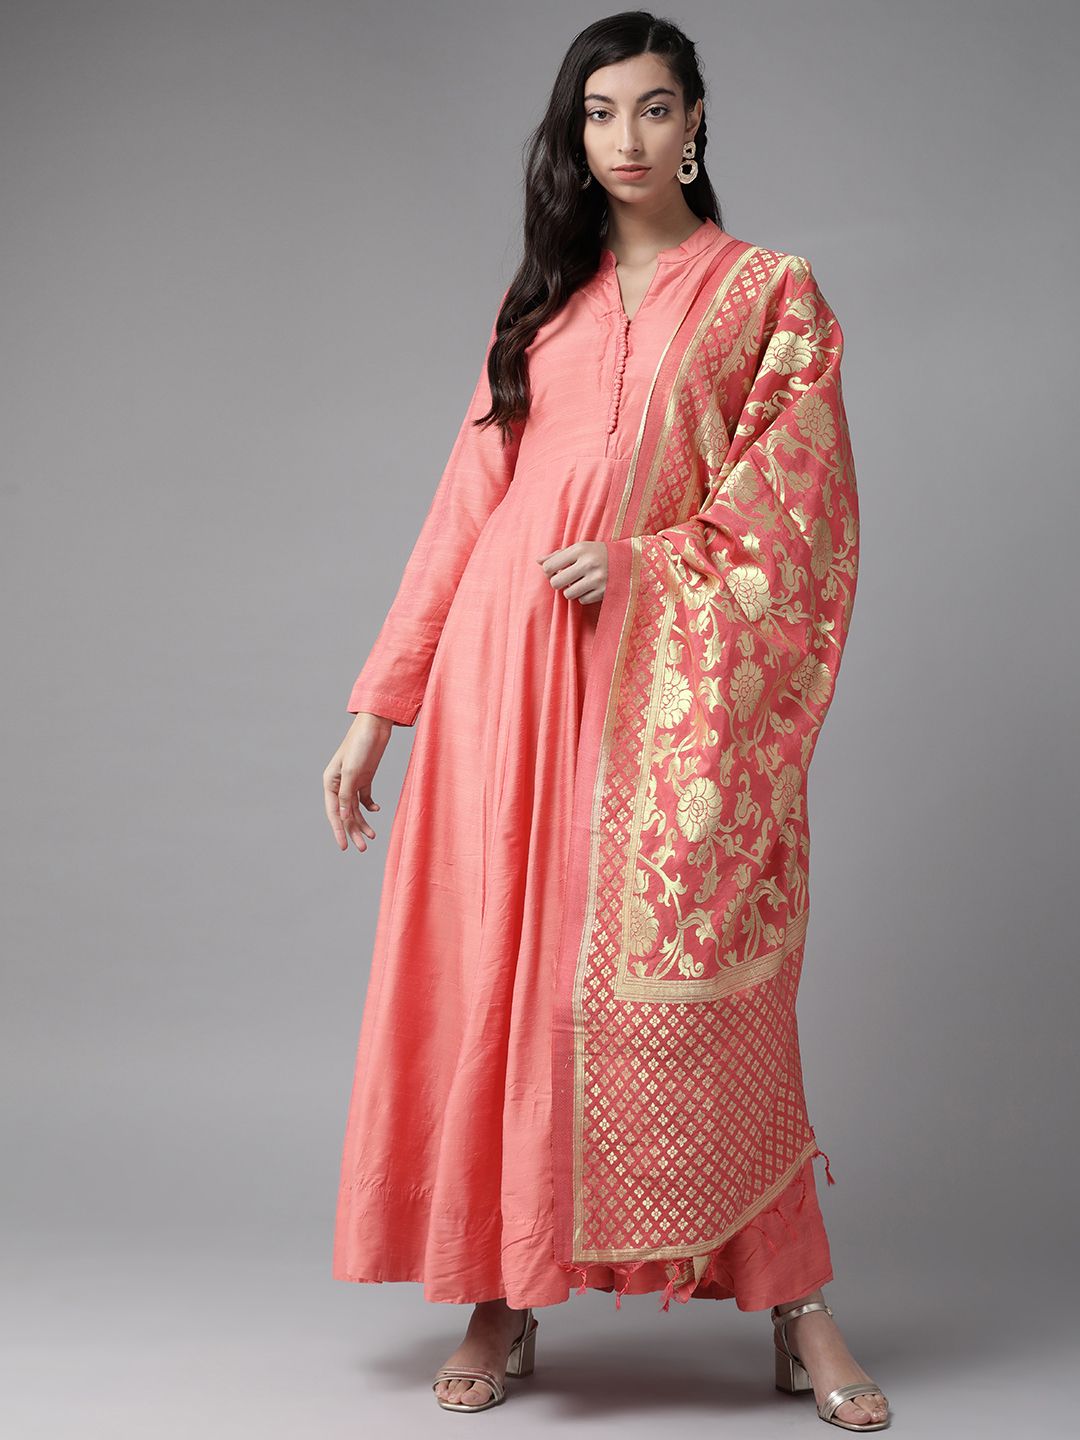 Vishudh Women Coral Pink & Golden Solid Maxi Dress with Dupatta Price in India